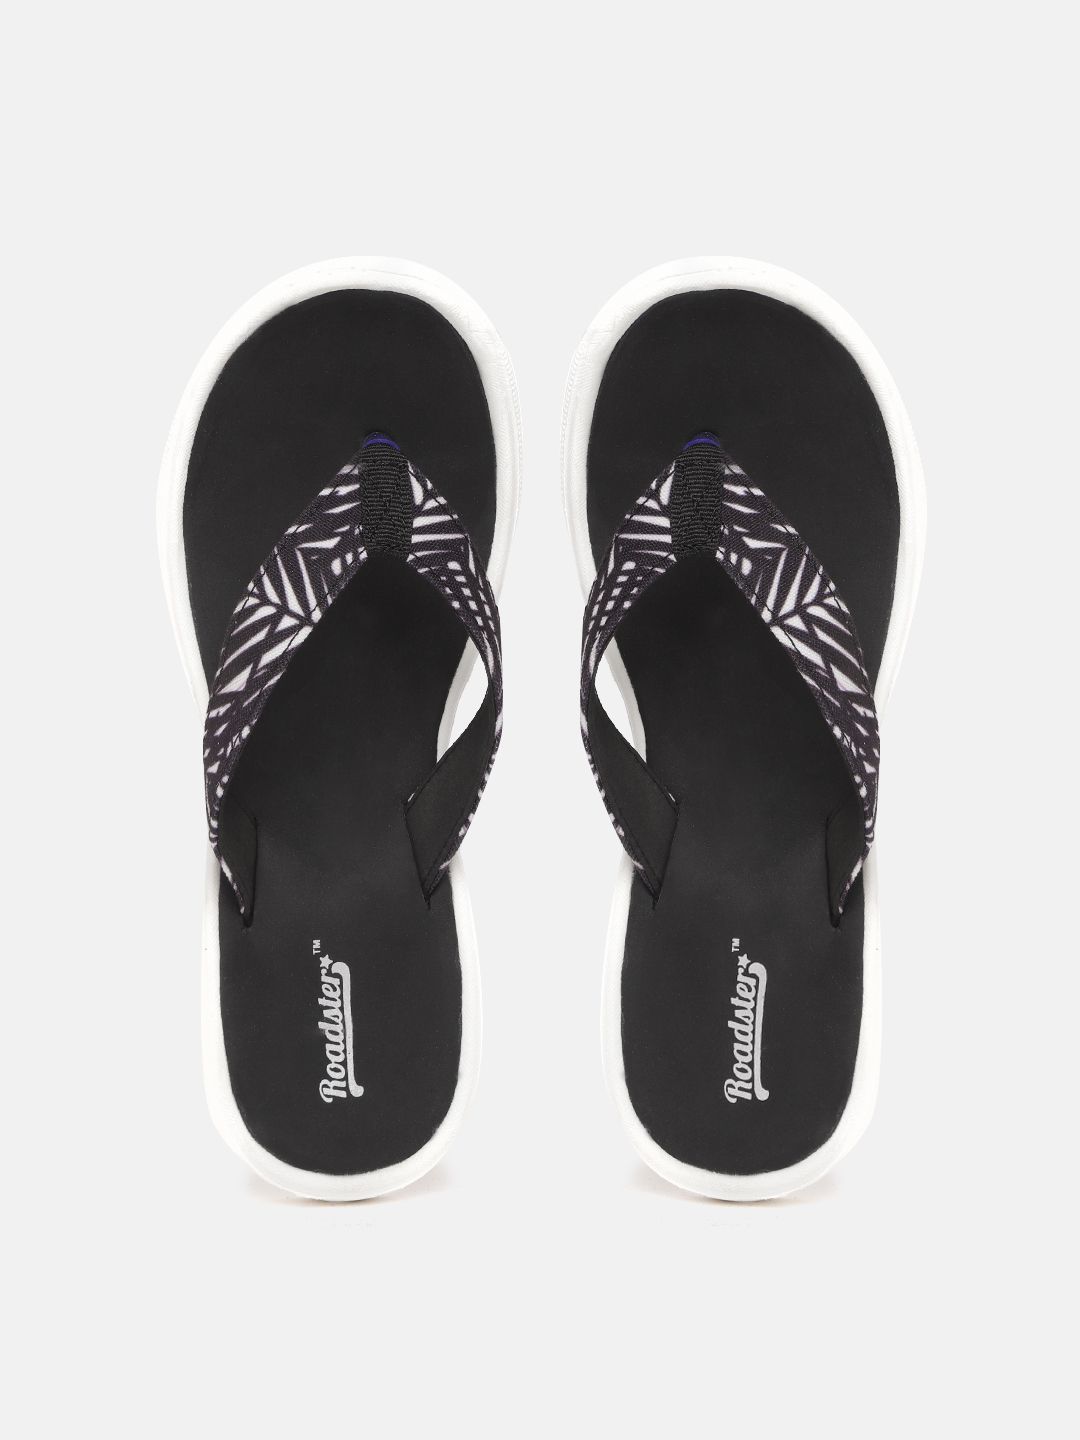 The Roadster Lifestyle Co Women Black & White Printed Thong Flip-Flops Price in India